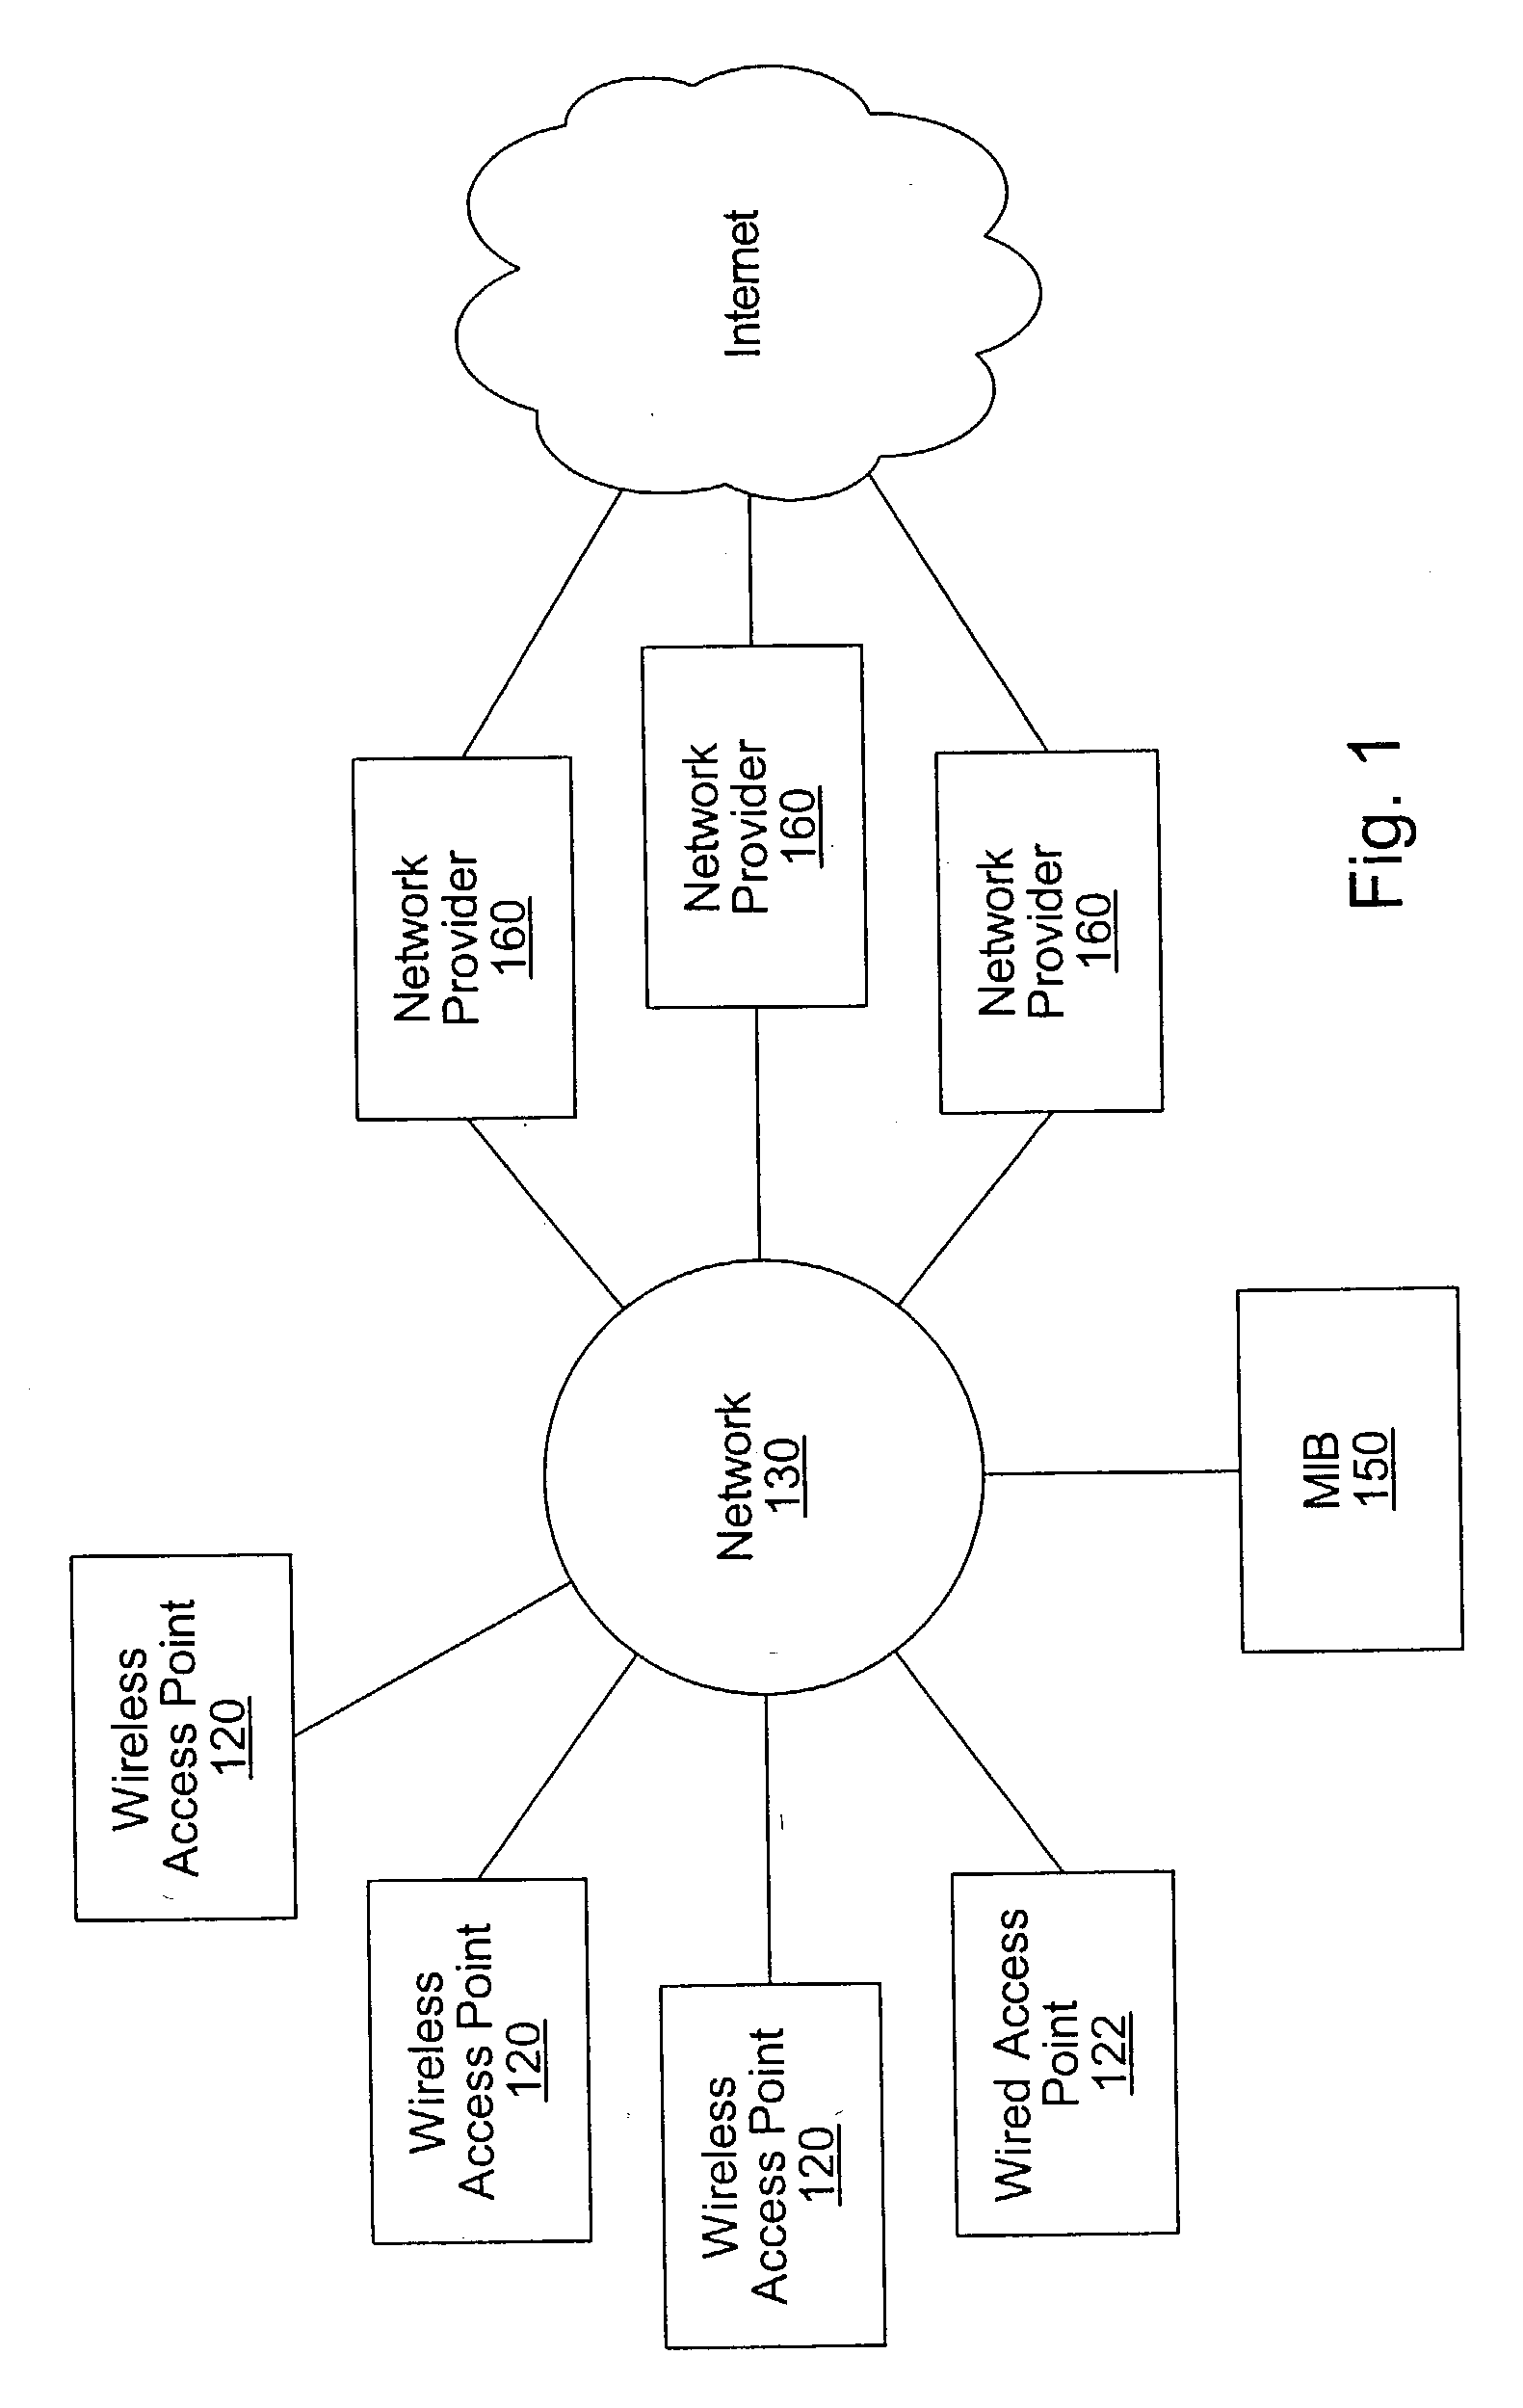 System and method for user access to a distributed network communication system using persistent identification of subscribers